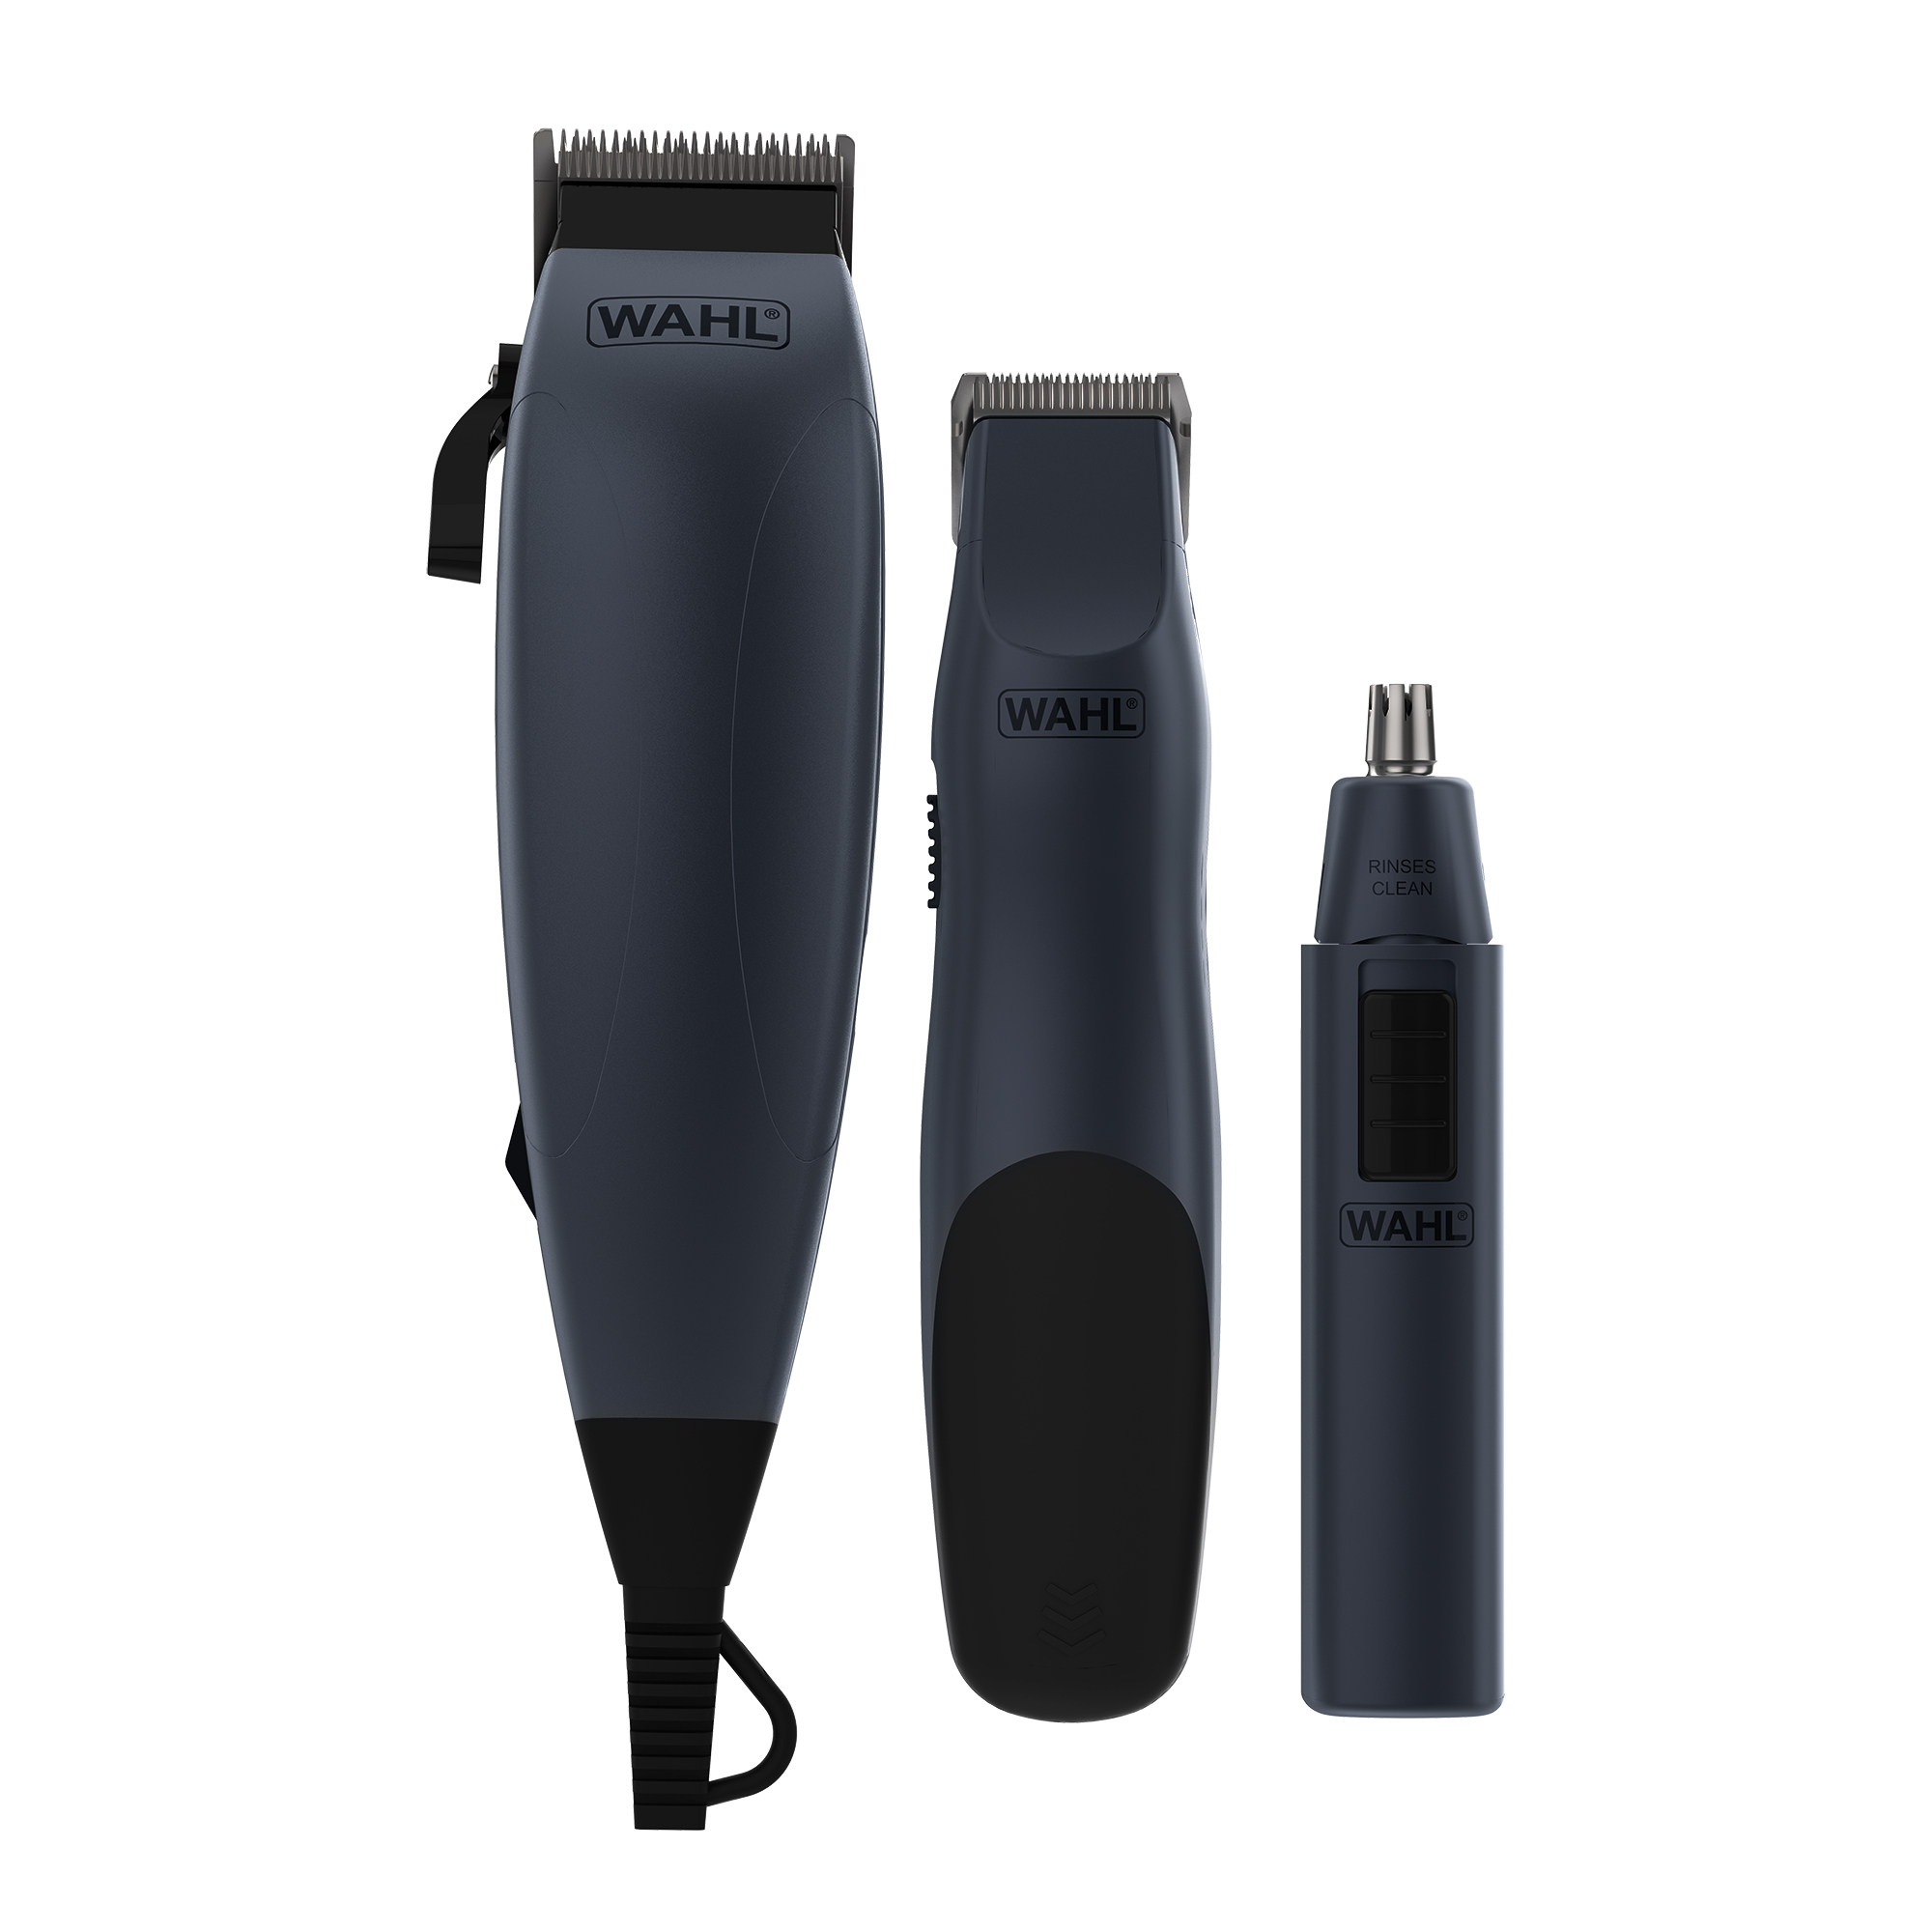 Clipper & Trimmer Grooming Set